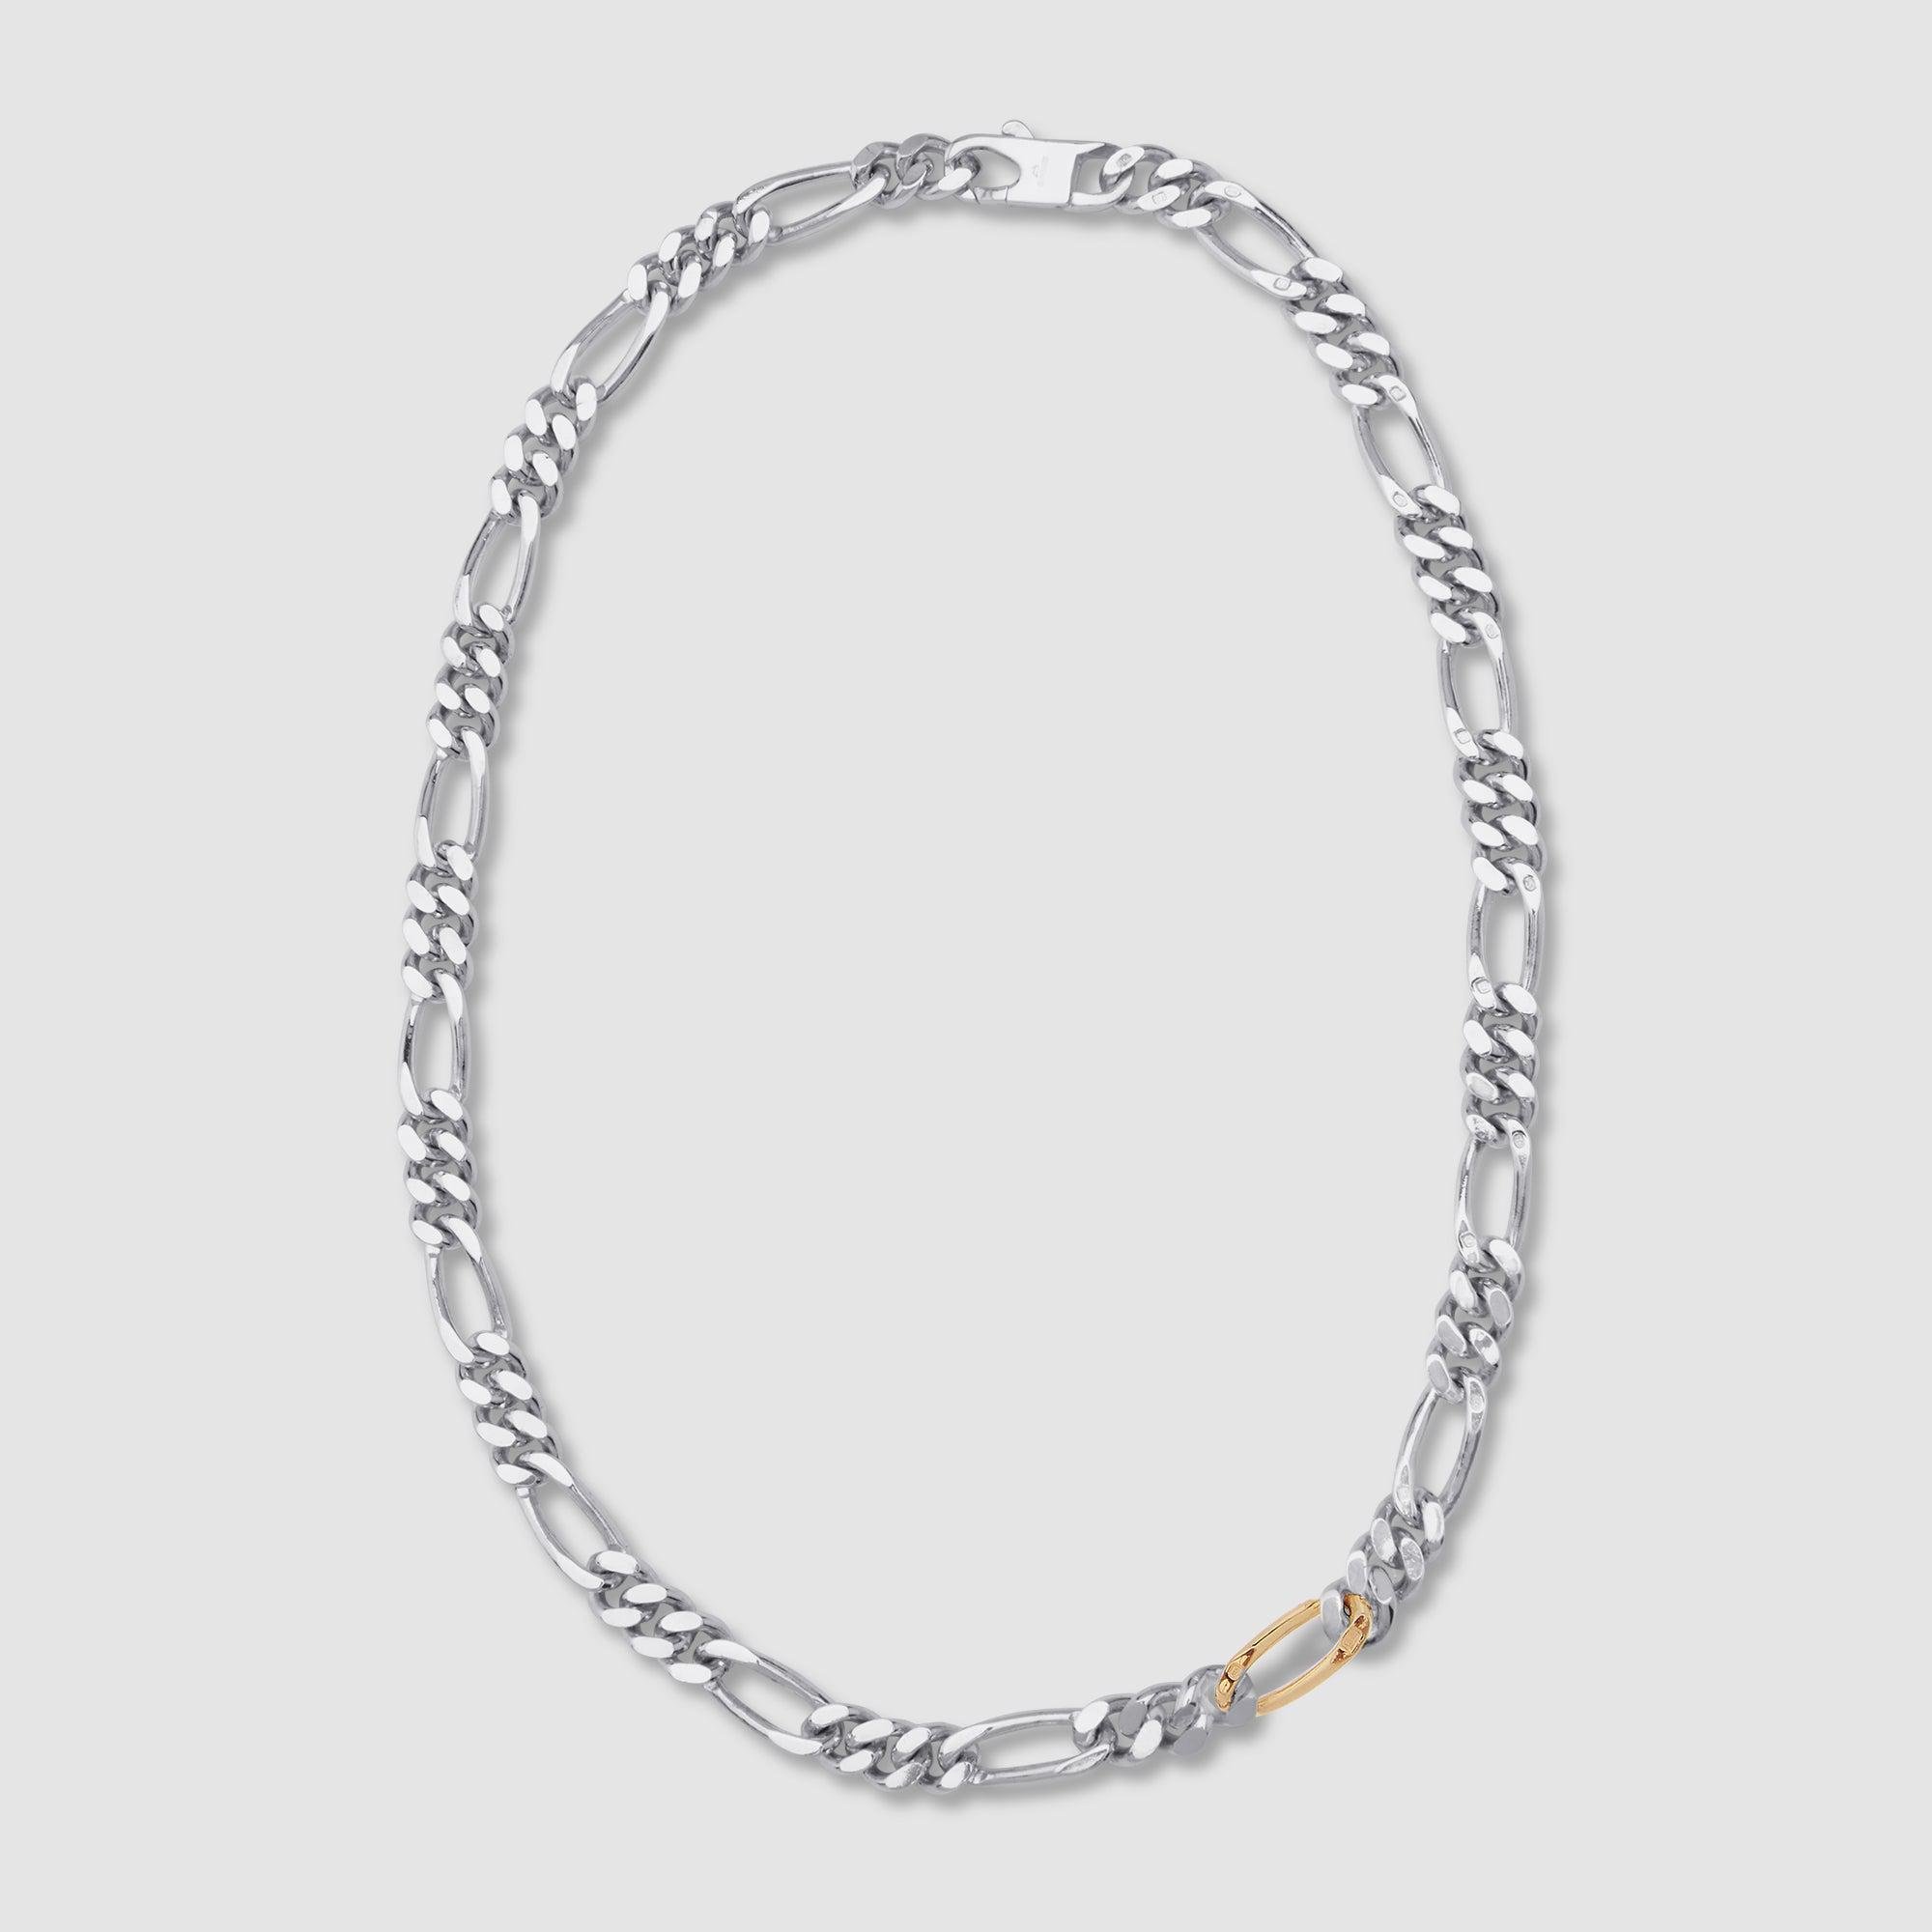 Andrew Bunney - Silver Figaro Necklace with Gold Link by ANDREW BUNNEY